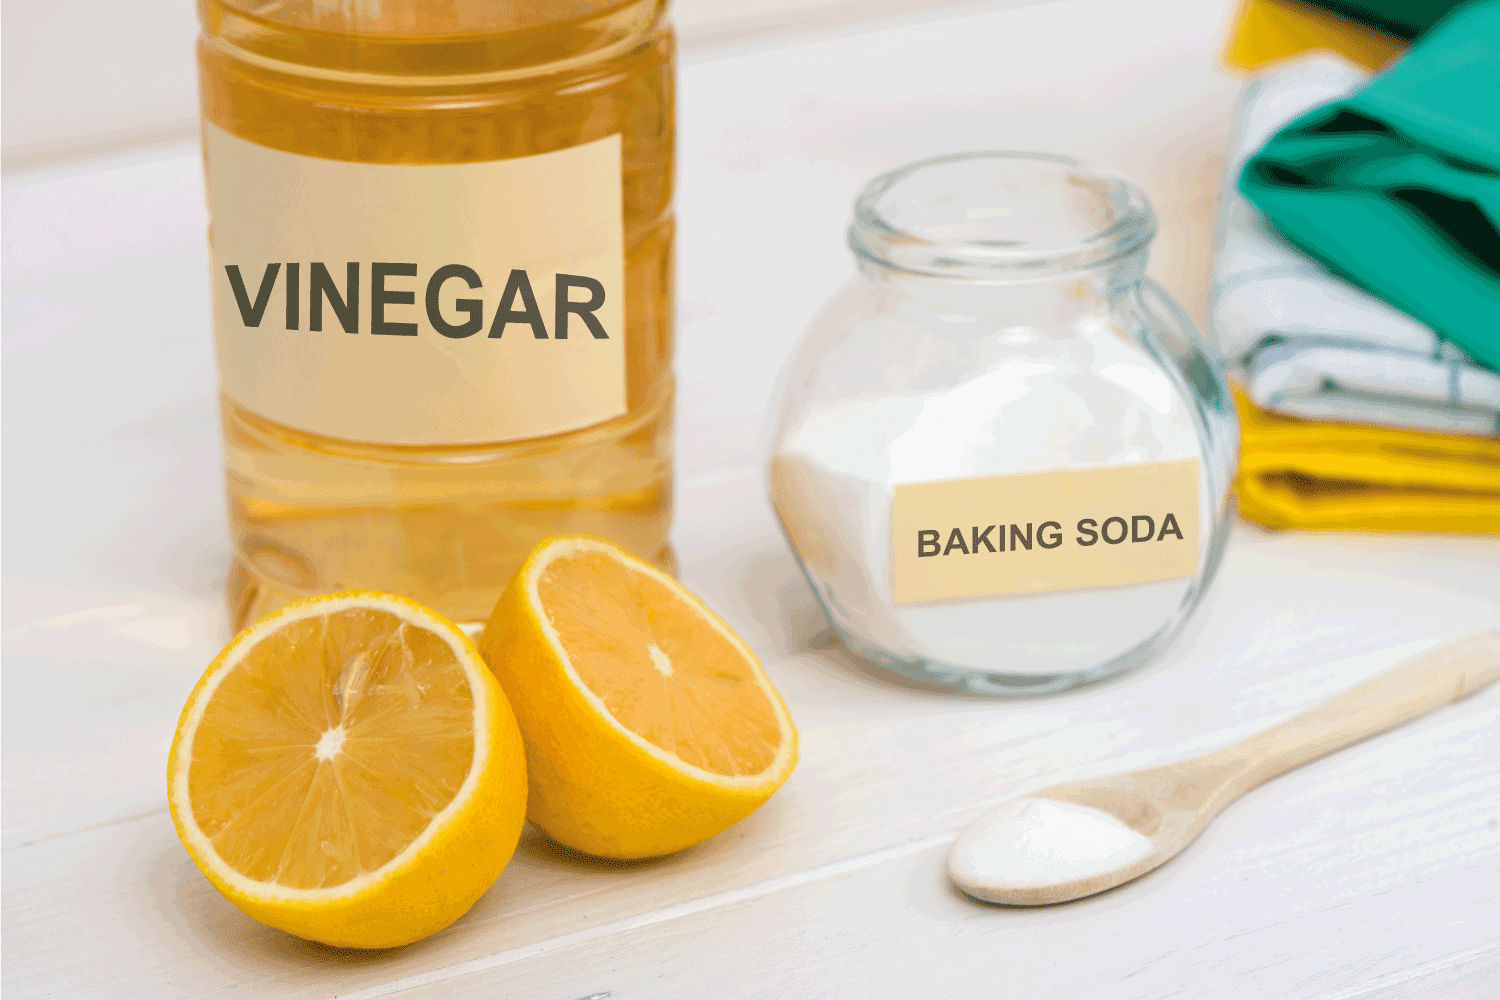 natural cleaners, baking soda, vinegar, and lemons on a table